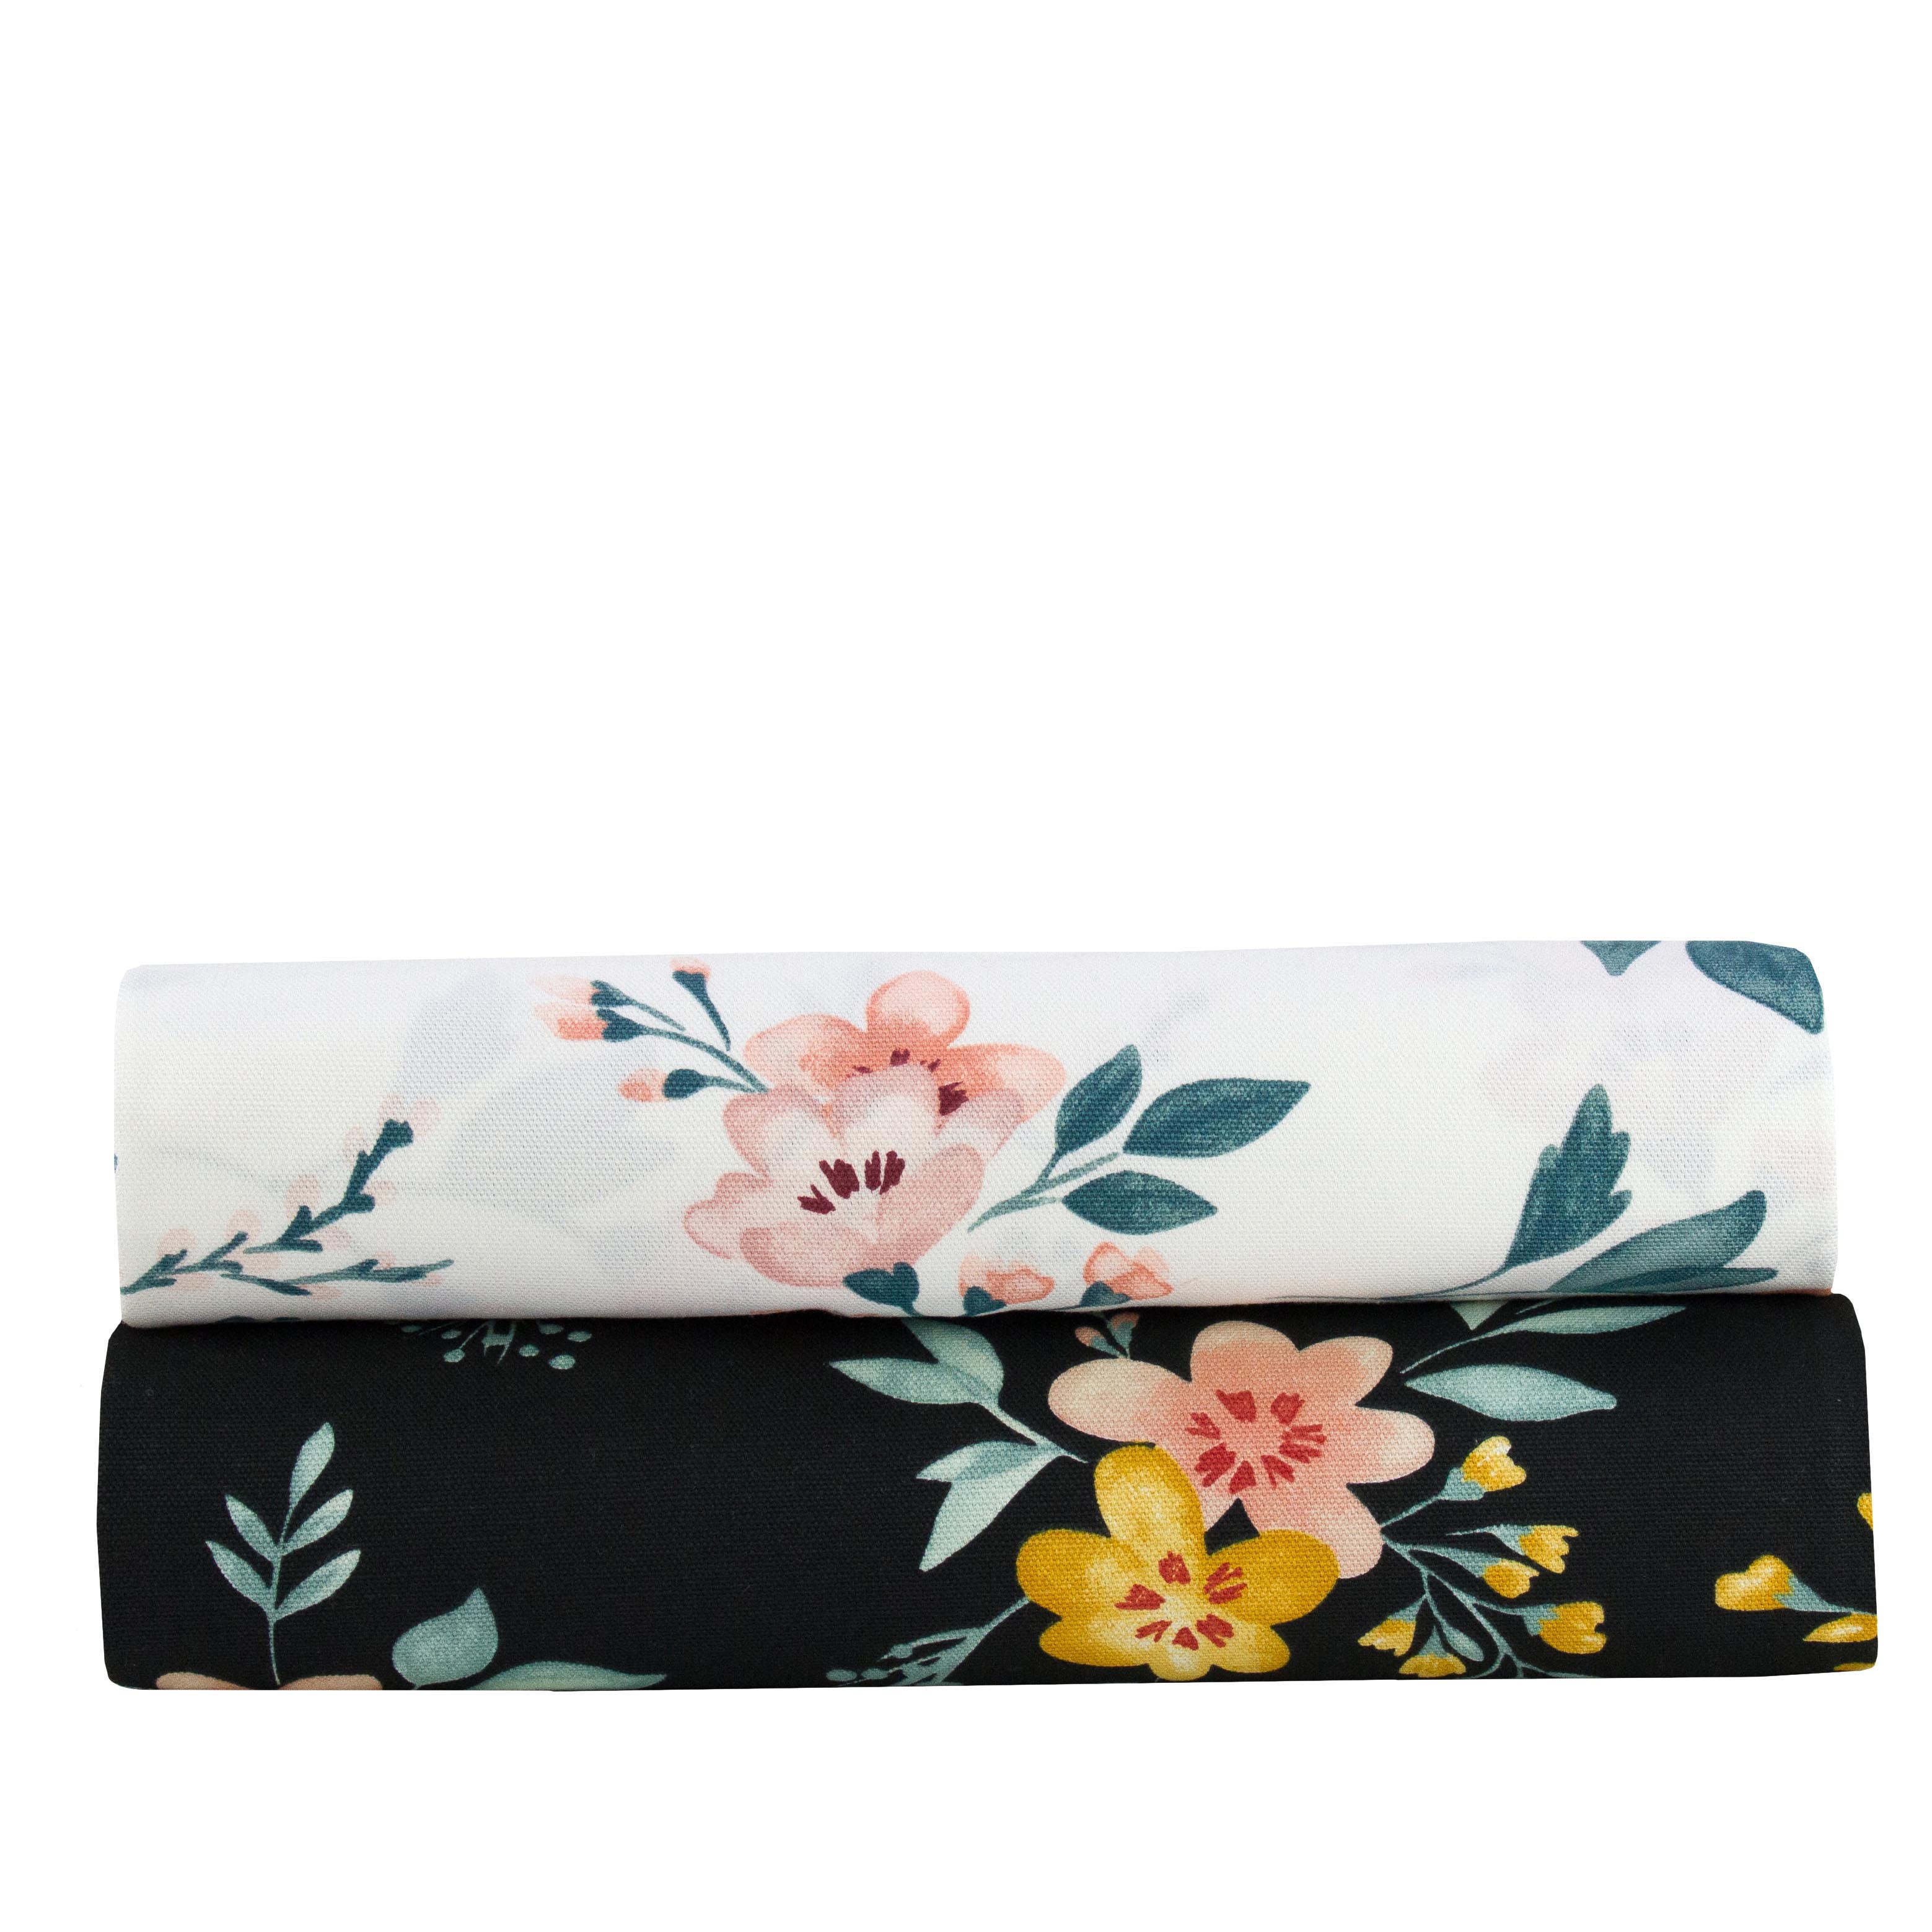 Better Homes & Gardens 100% Cotton Floral Black, 2 Yard Precut Fabric - image 5 of 6